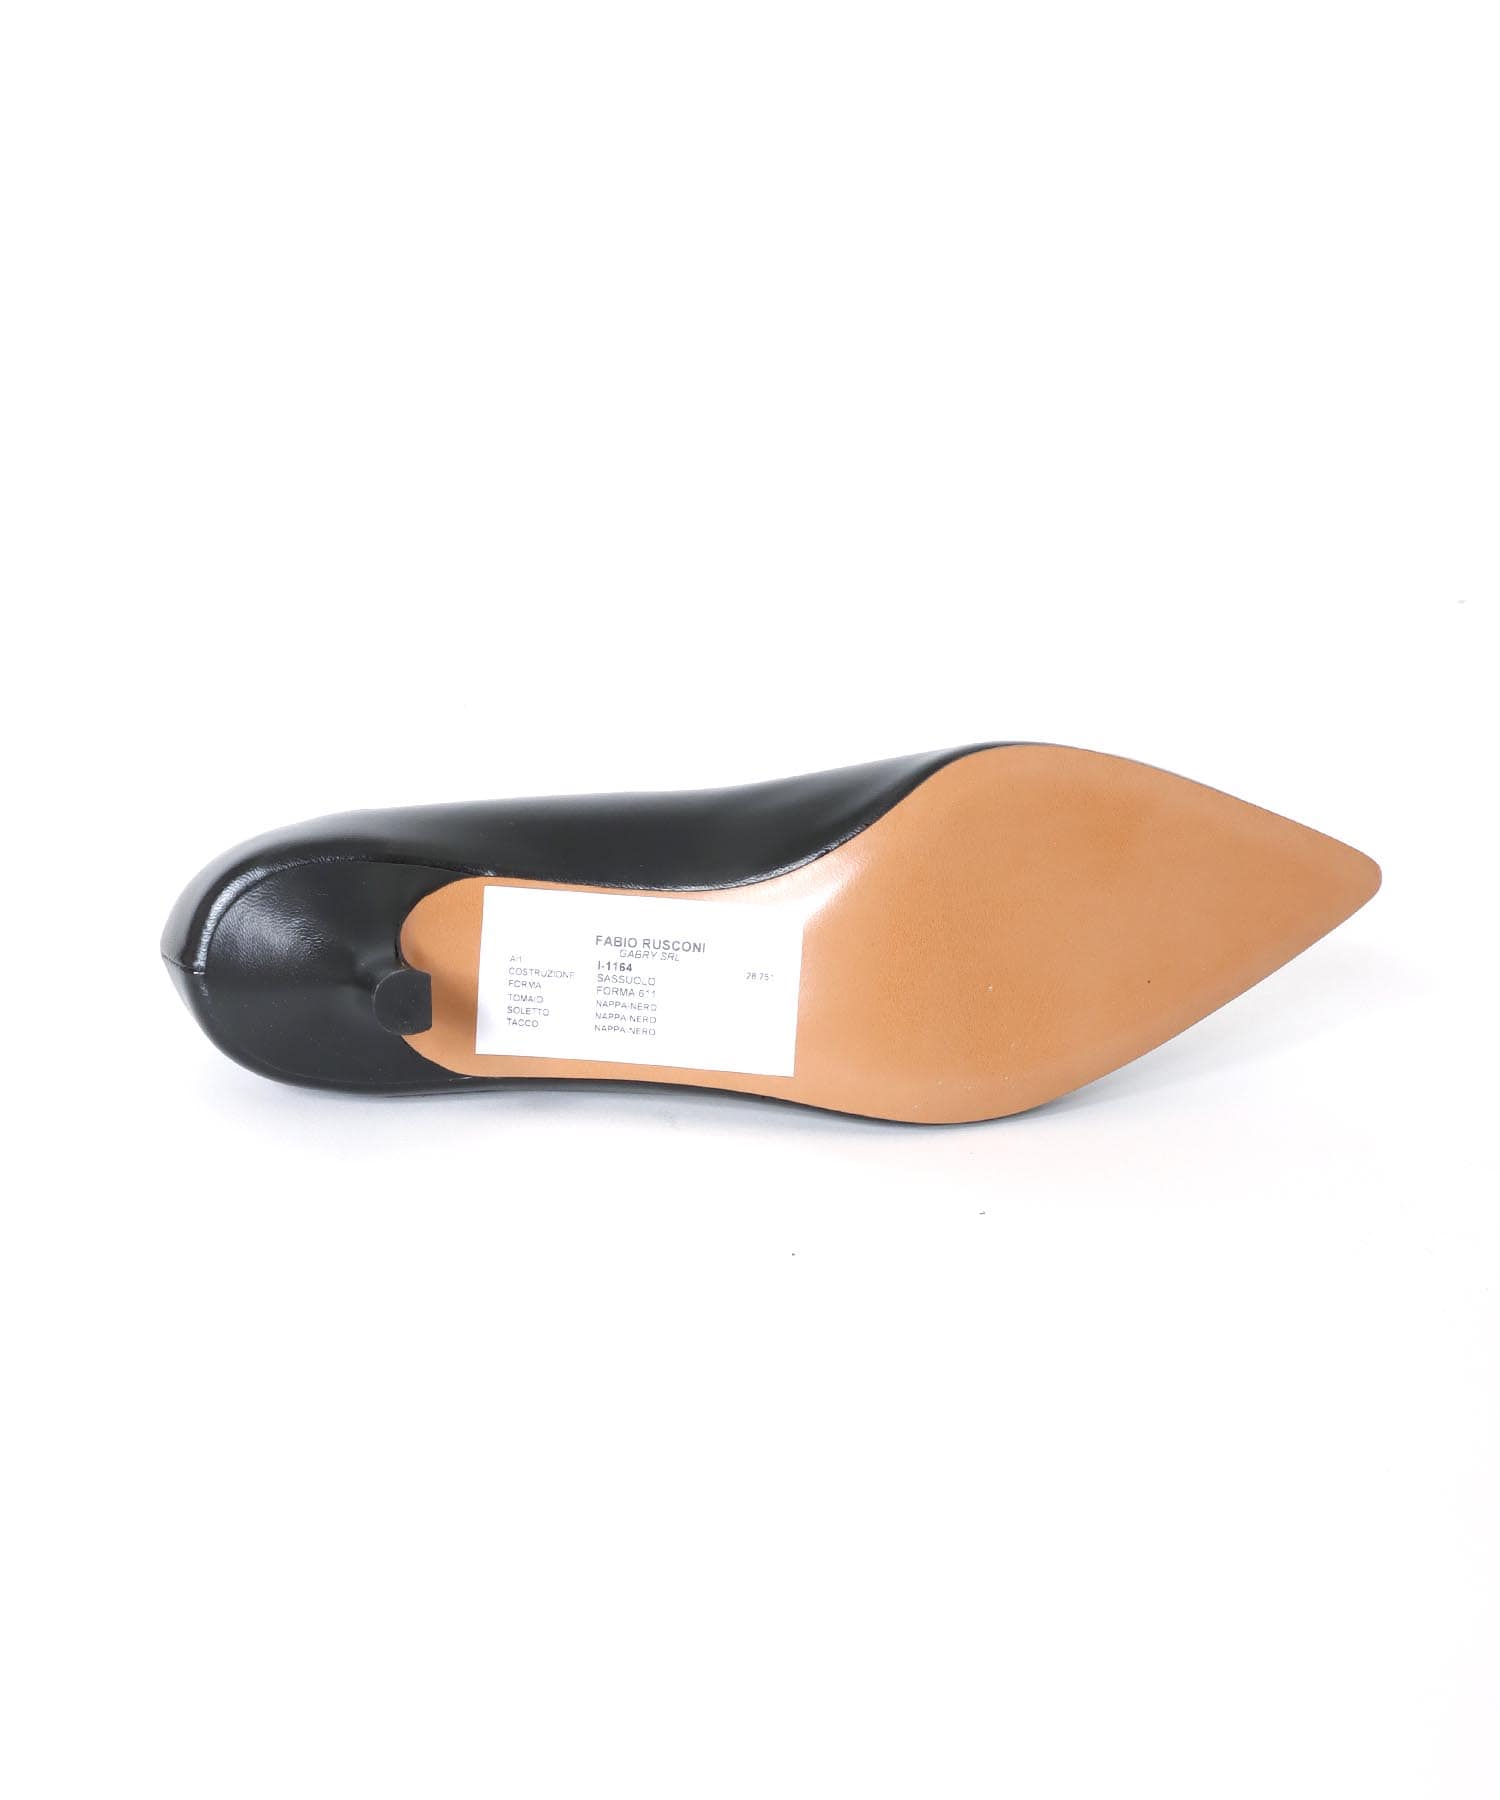 FABIO RUSCONI＞GABRY pointed toe pumps | AND ON JIONE STORE 